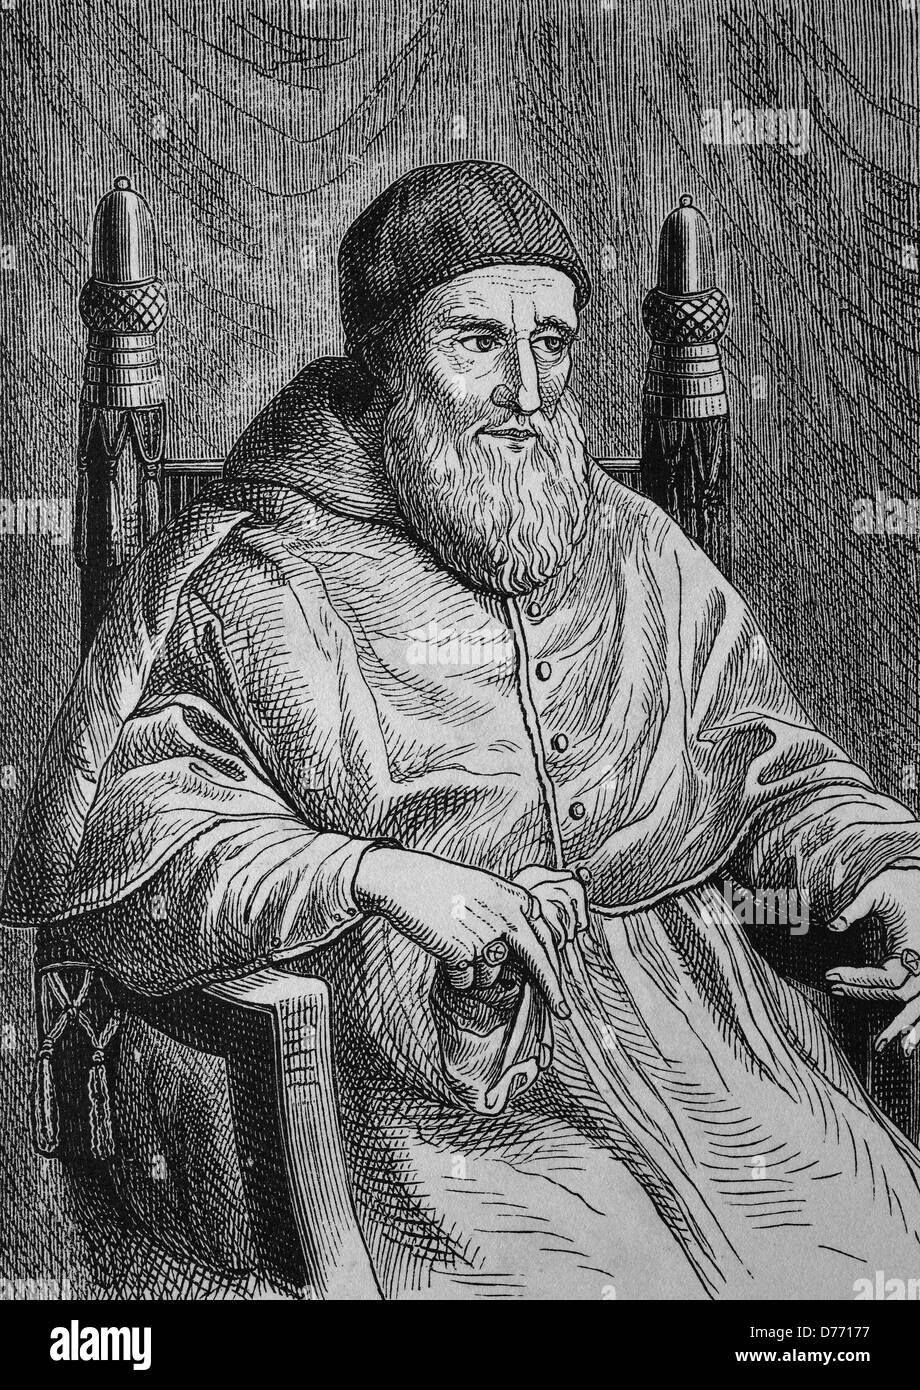 Giuliano della Rovere, Pope Julius II, 1443 - 1513, he was pope from 1503 untill 1513, founder of the Swiss Guard, woodcut from Stock Photo